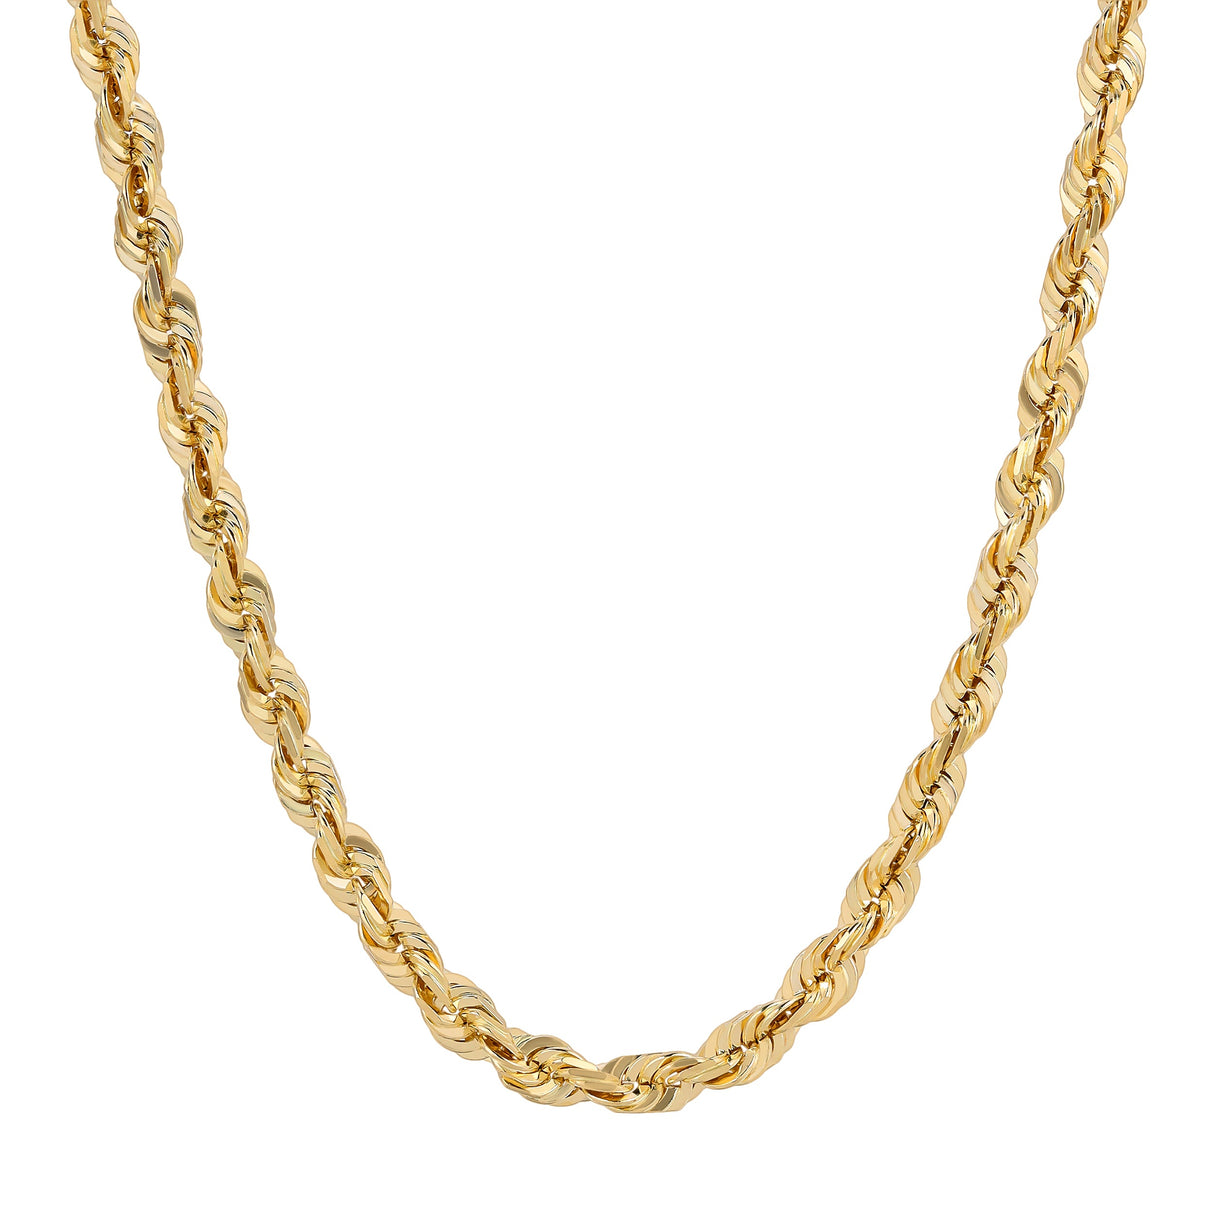 Italian Fashions Design | Men's 10K Gold Chain (1.5-6mm) | Real yellow gold chains.